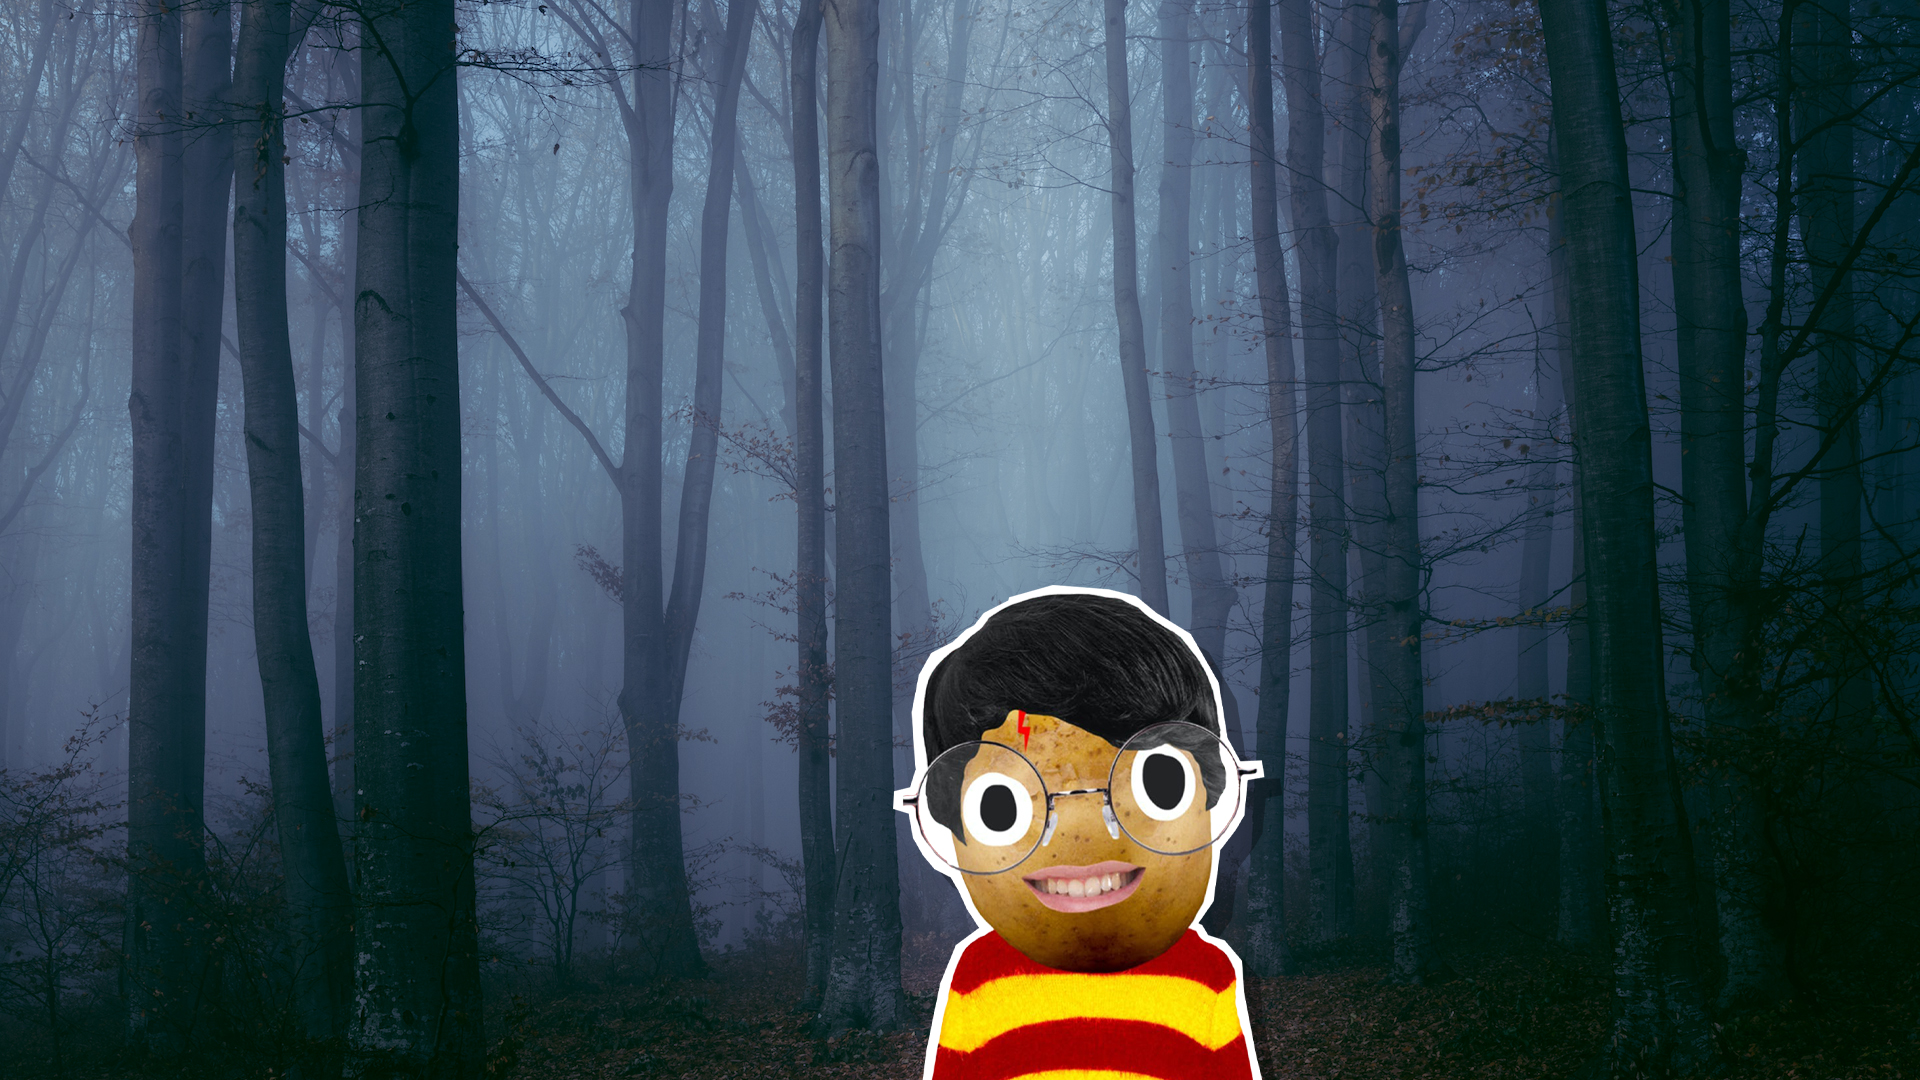 Harry in a spooky forest